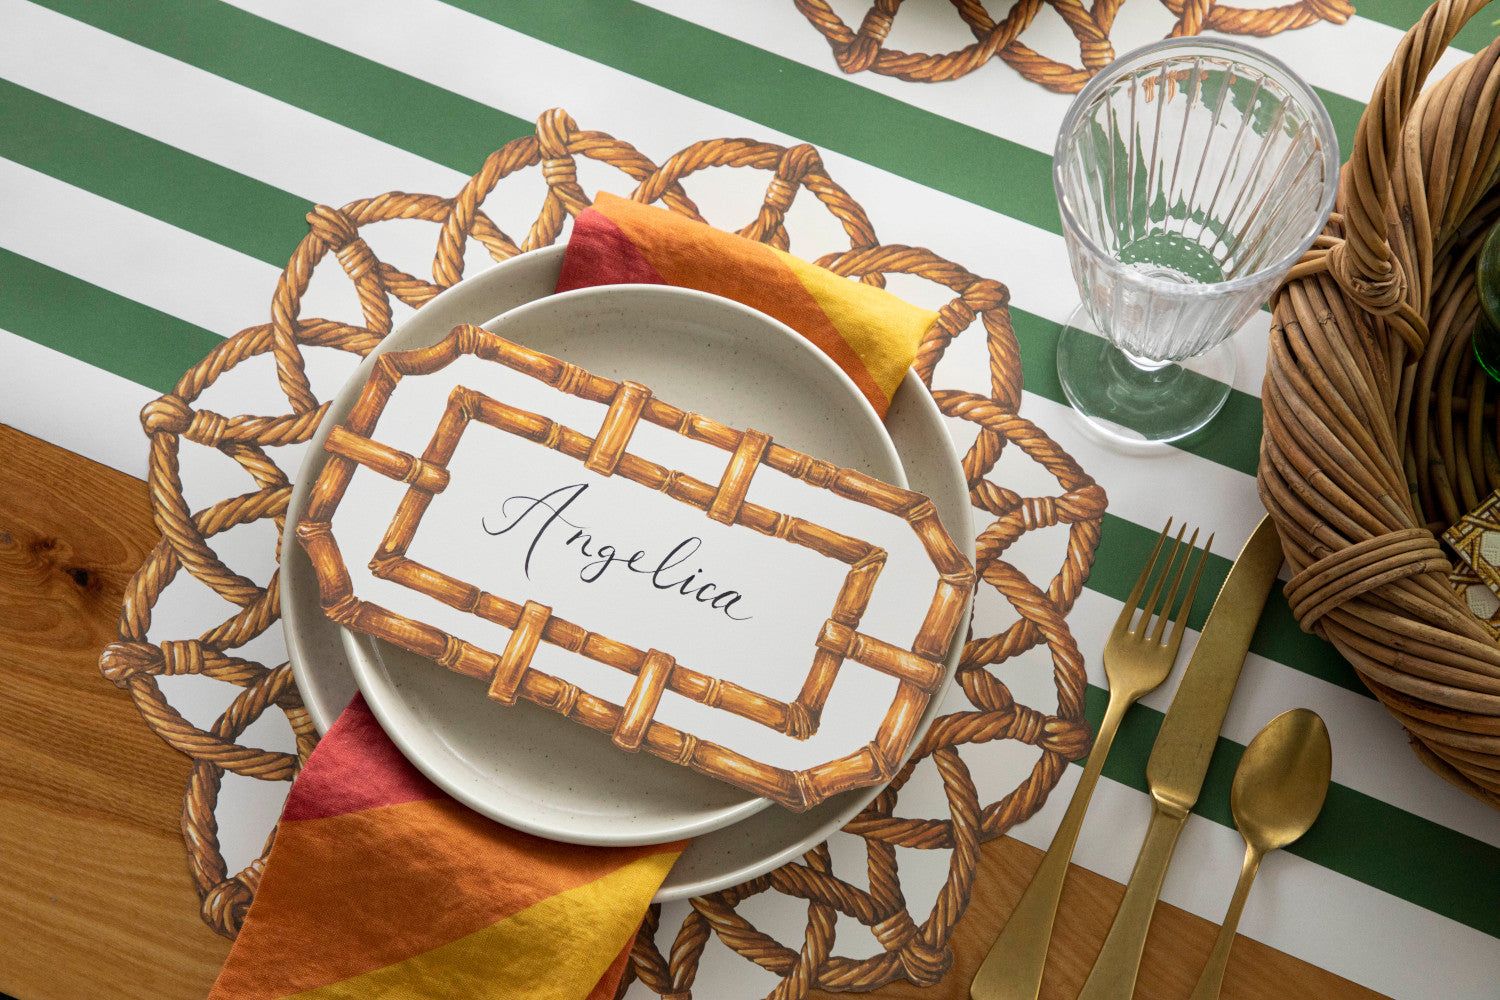 A place setting with a Die-cut Rattan Weave Placemat from Hester &amp; Cook, a plate, and a glass, accompanied by a napkin.